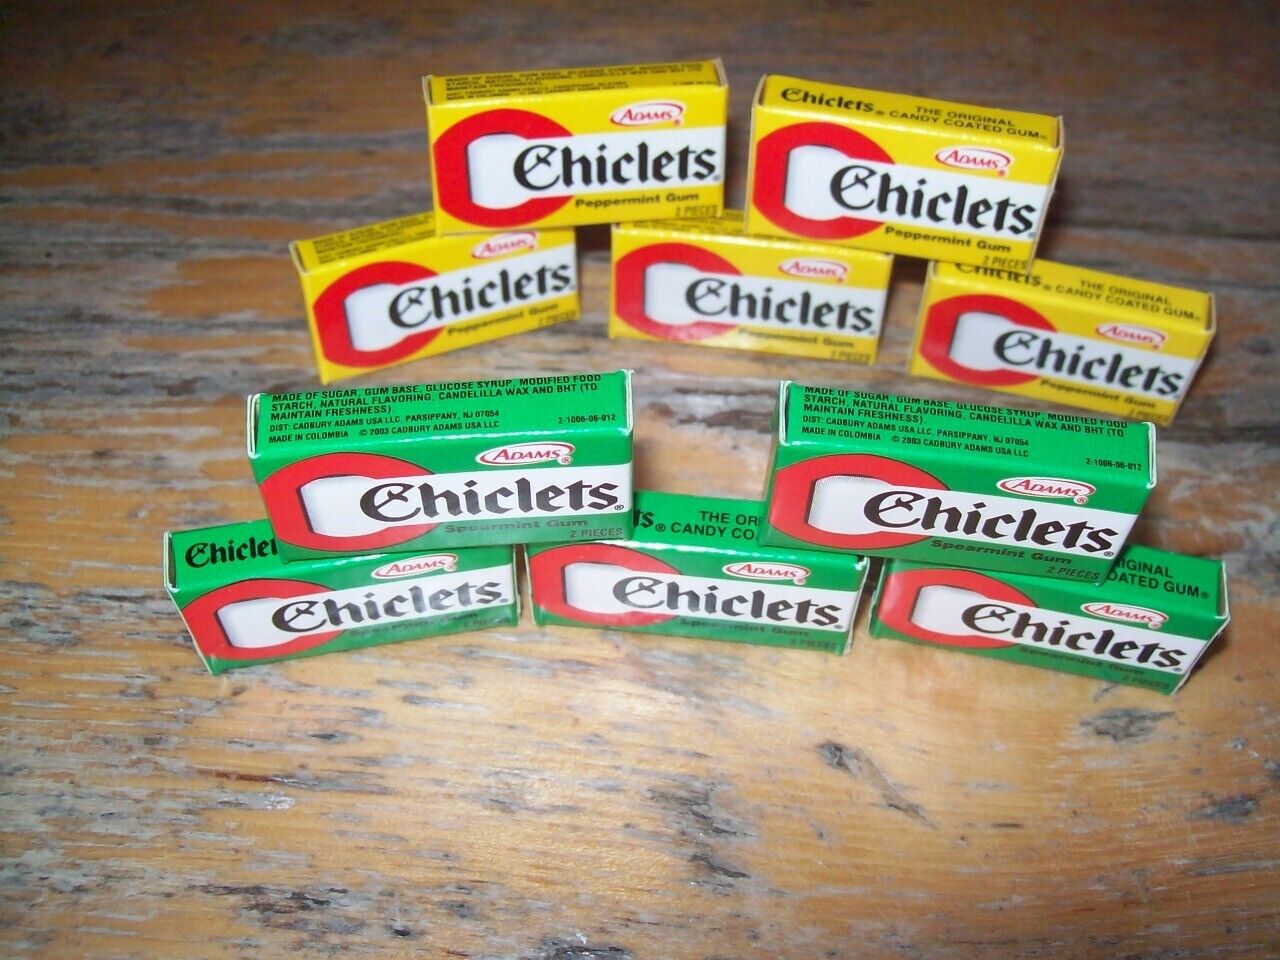 Adams Chiclets Gum 10 Full 2 Piece Boxes DISCONTINUED Advertising Display